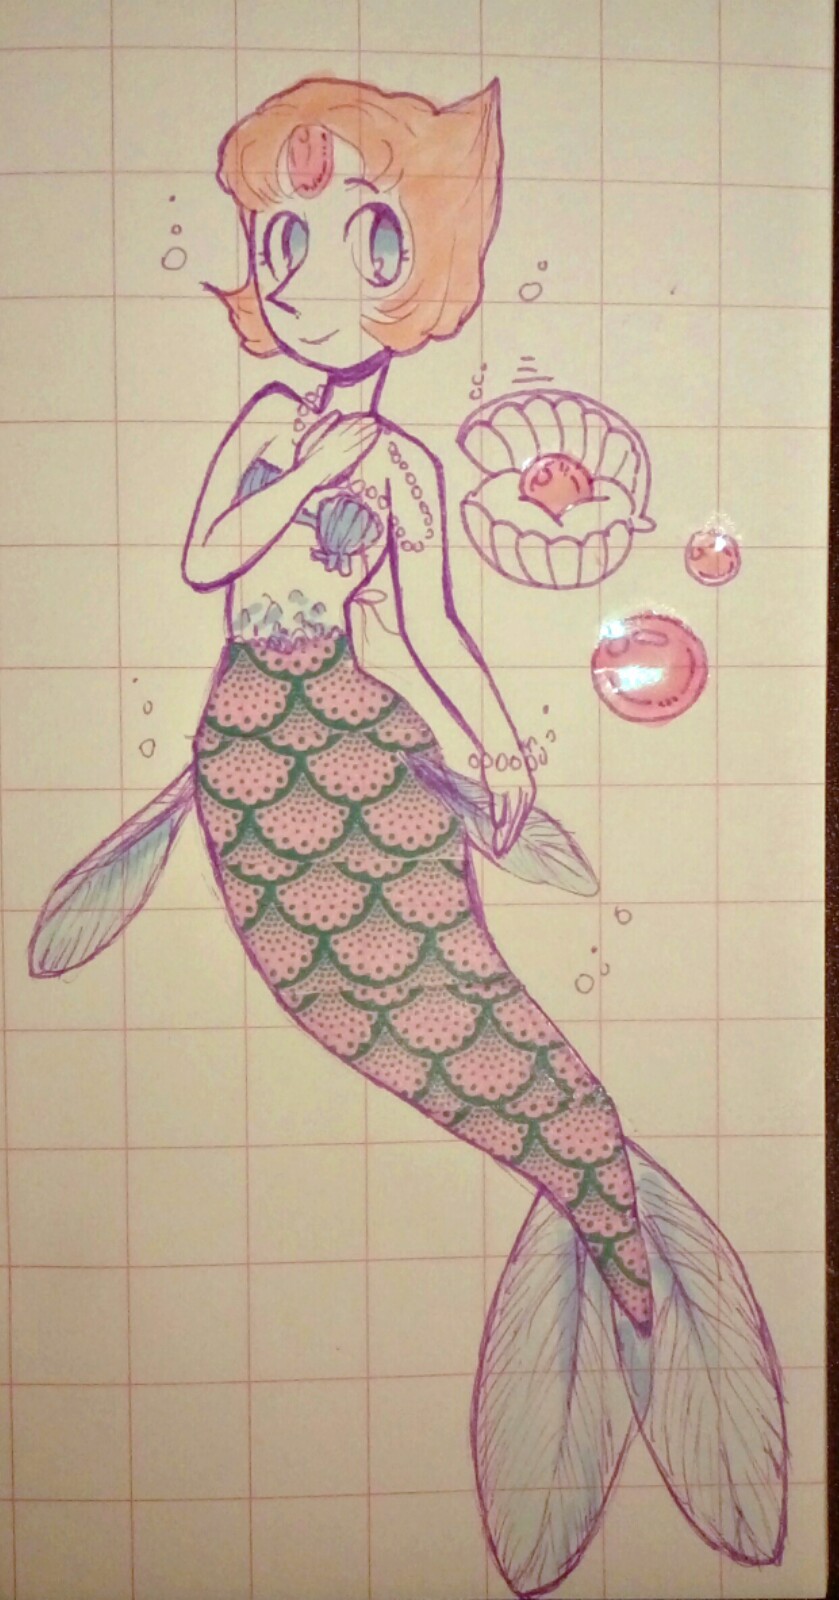 Mermay no. 1: Pearl🐚 Tail:washi tape Pearls: iridescent foil✨